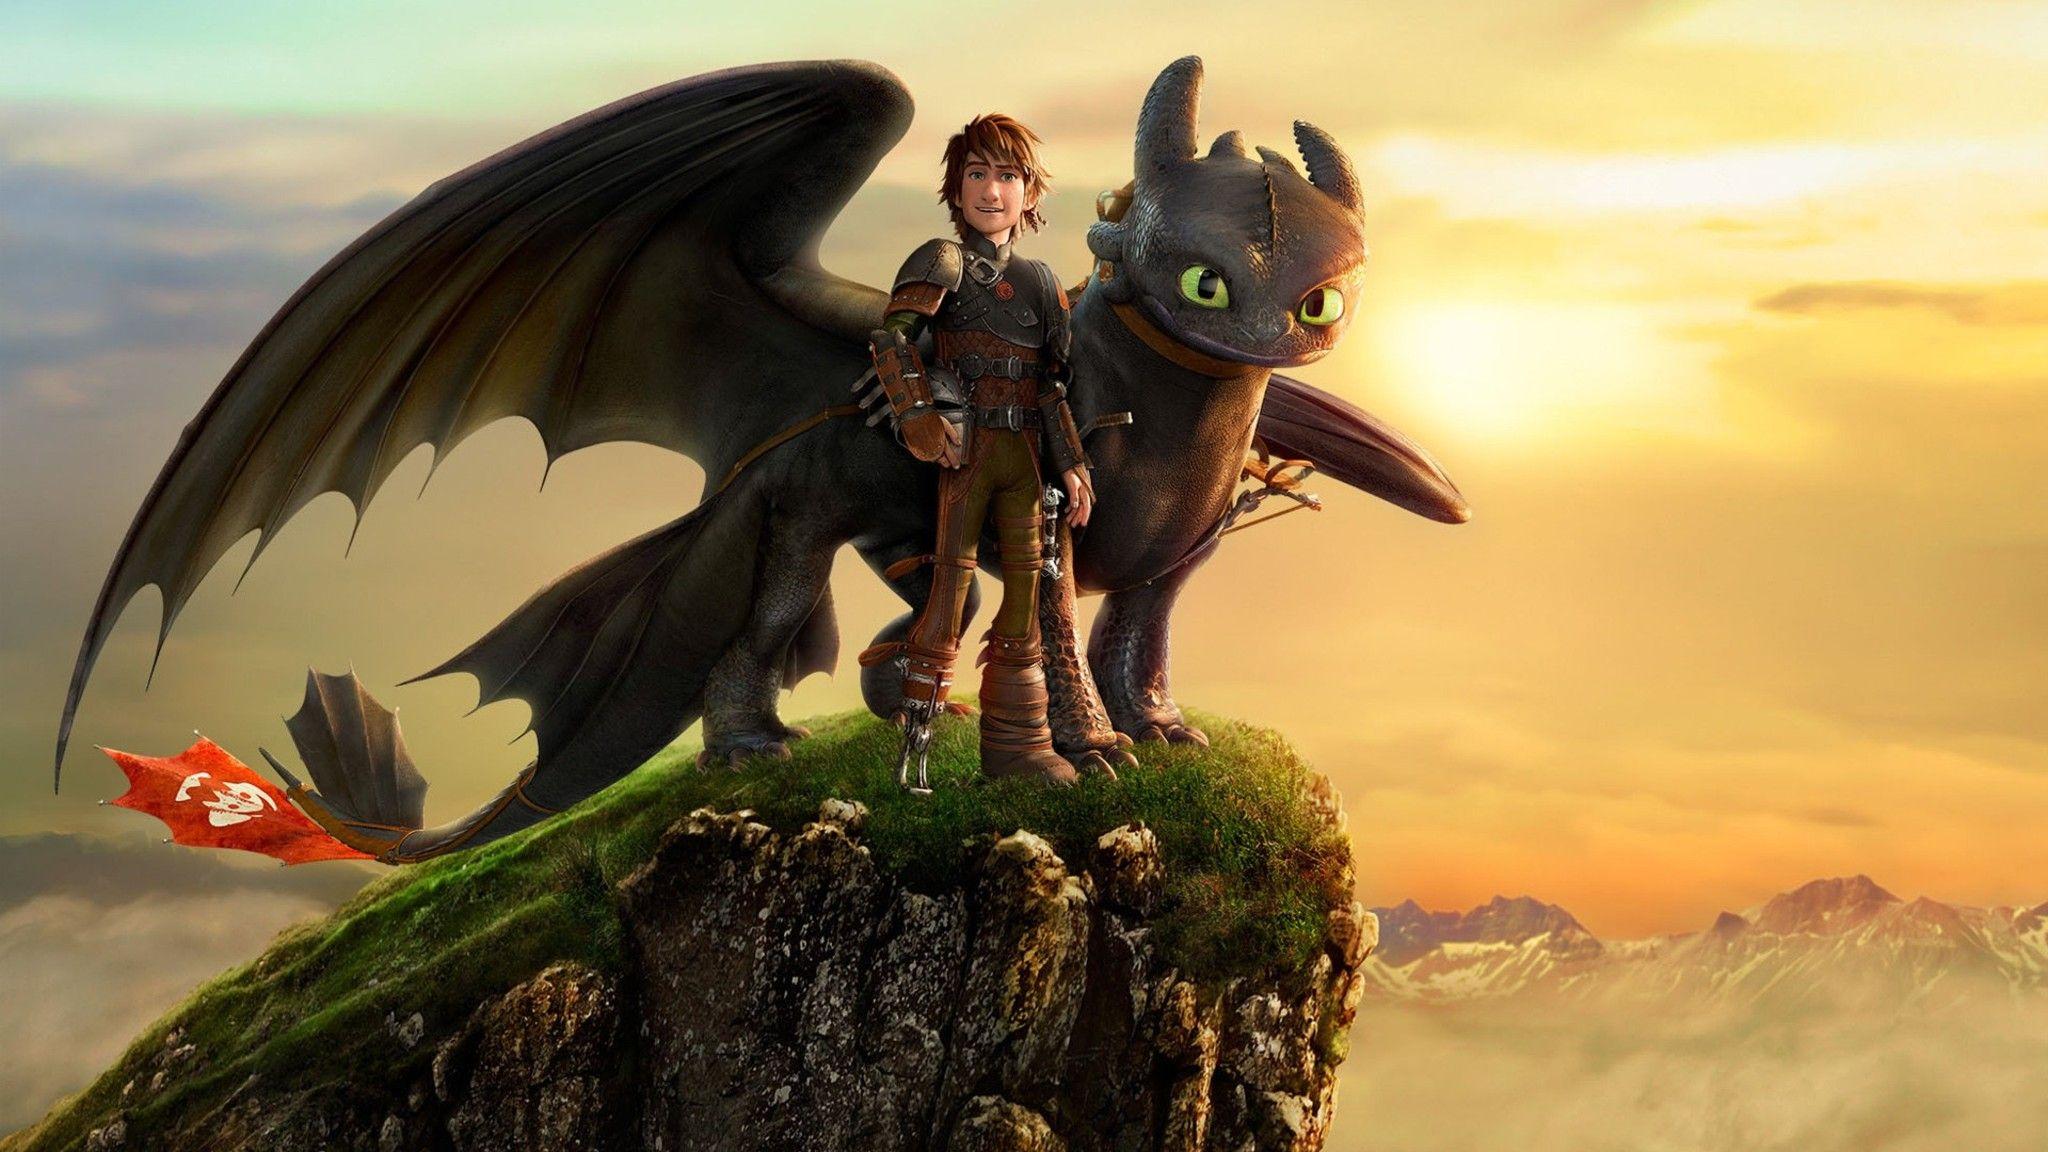 Wallpaper ID 460744  Movie How to Train Your Dragon 2 Phone Wallpaper  Hiccup How To Train Your Dragon Toothless How To Train Your Dragon  720x1280 free download